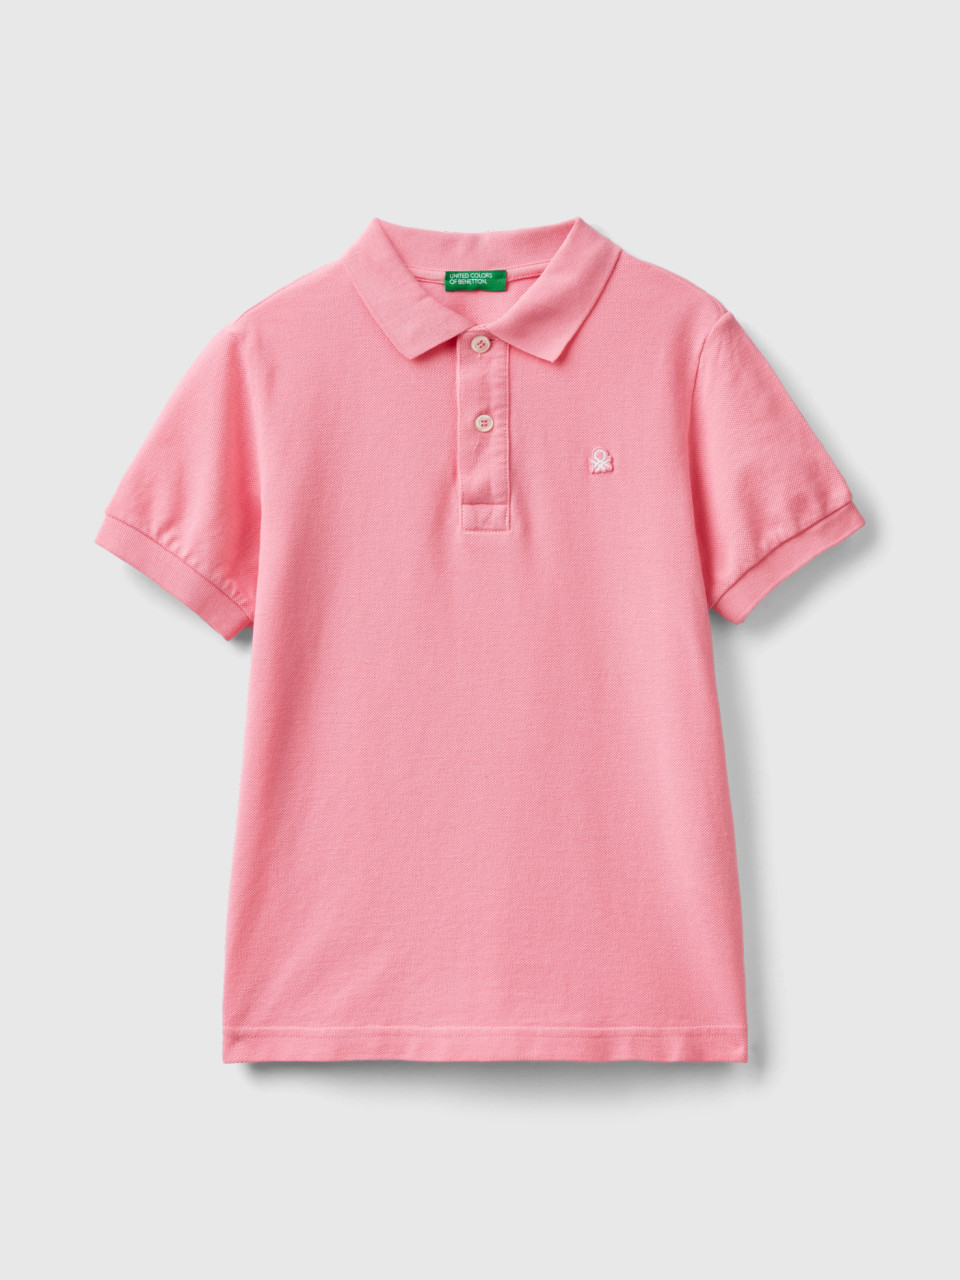 Benetton, Slim Fit Polo In 100% Organic Cotton, Pink, Kids